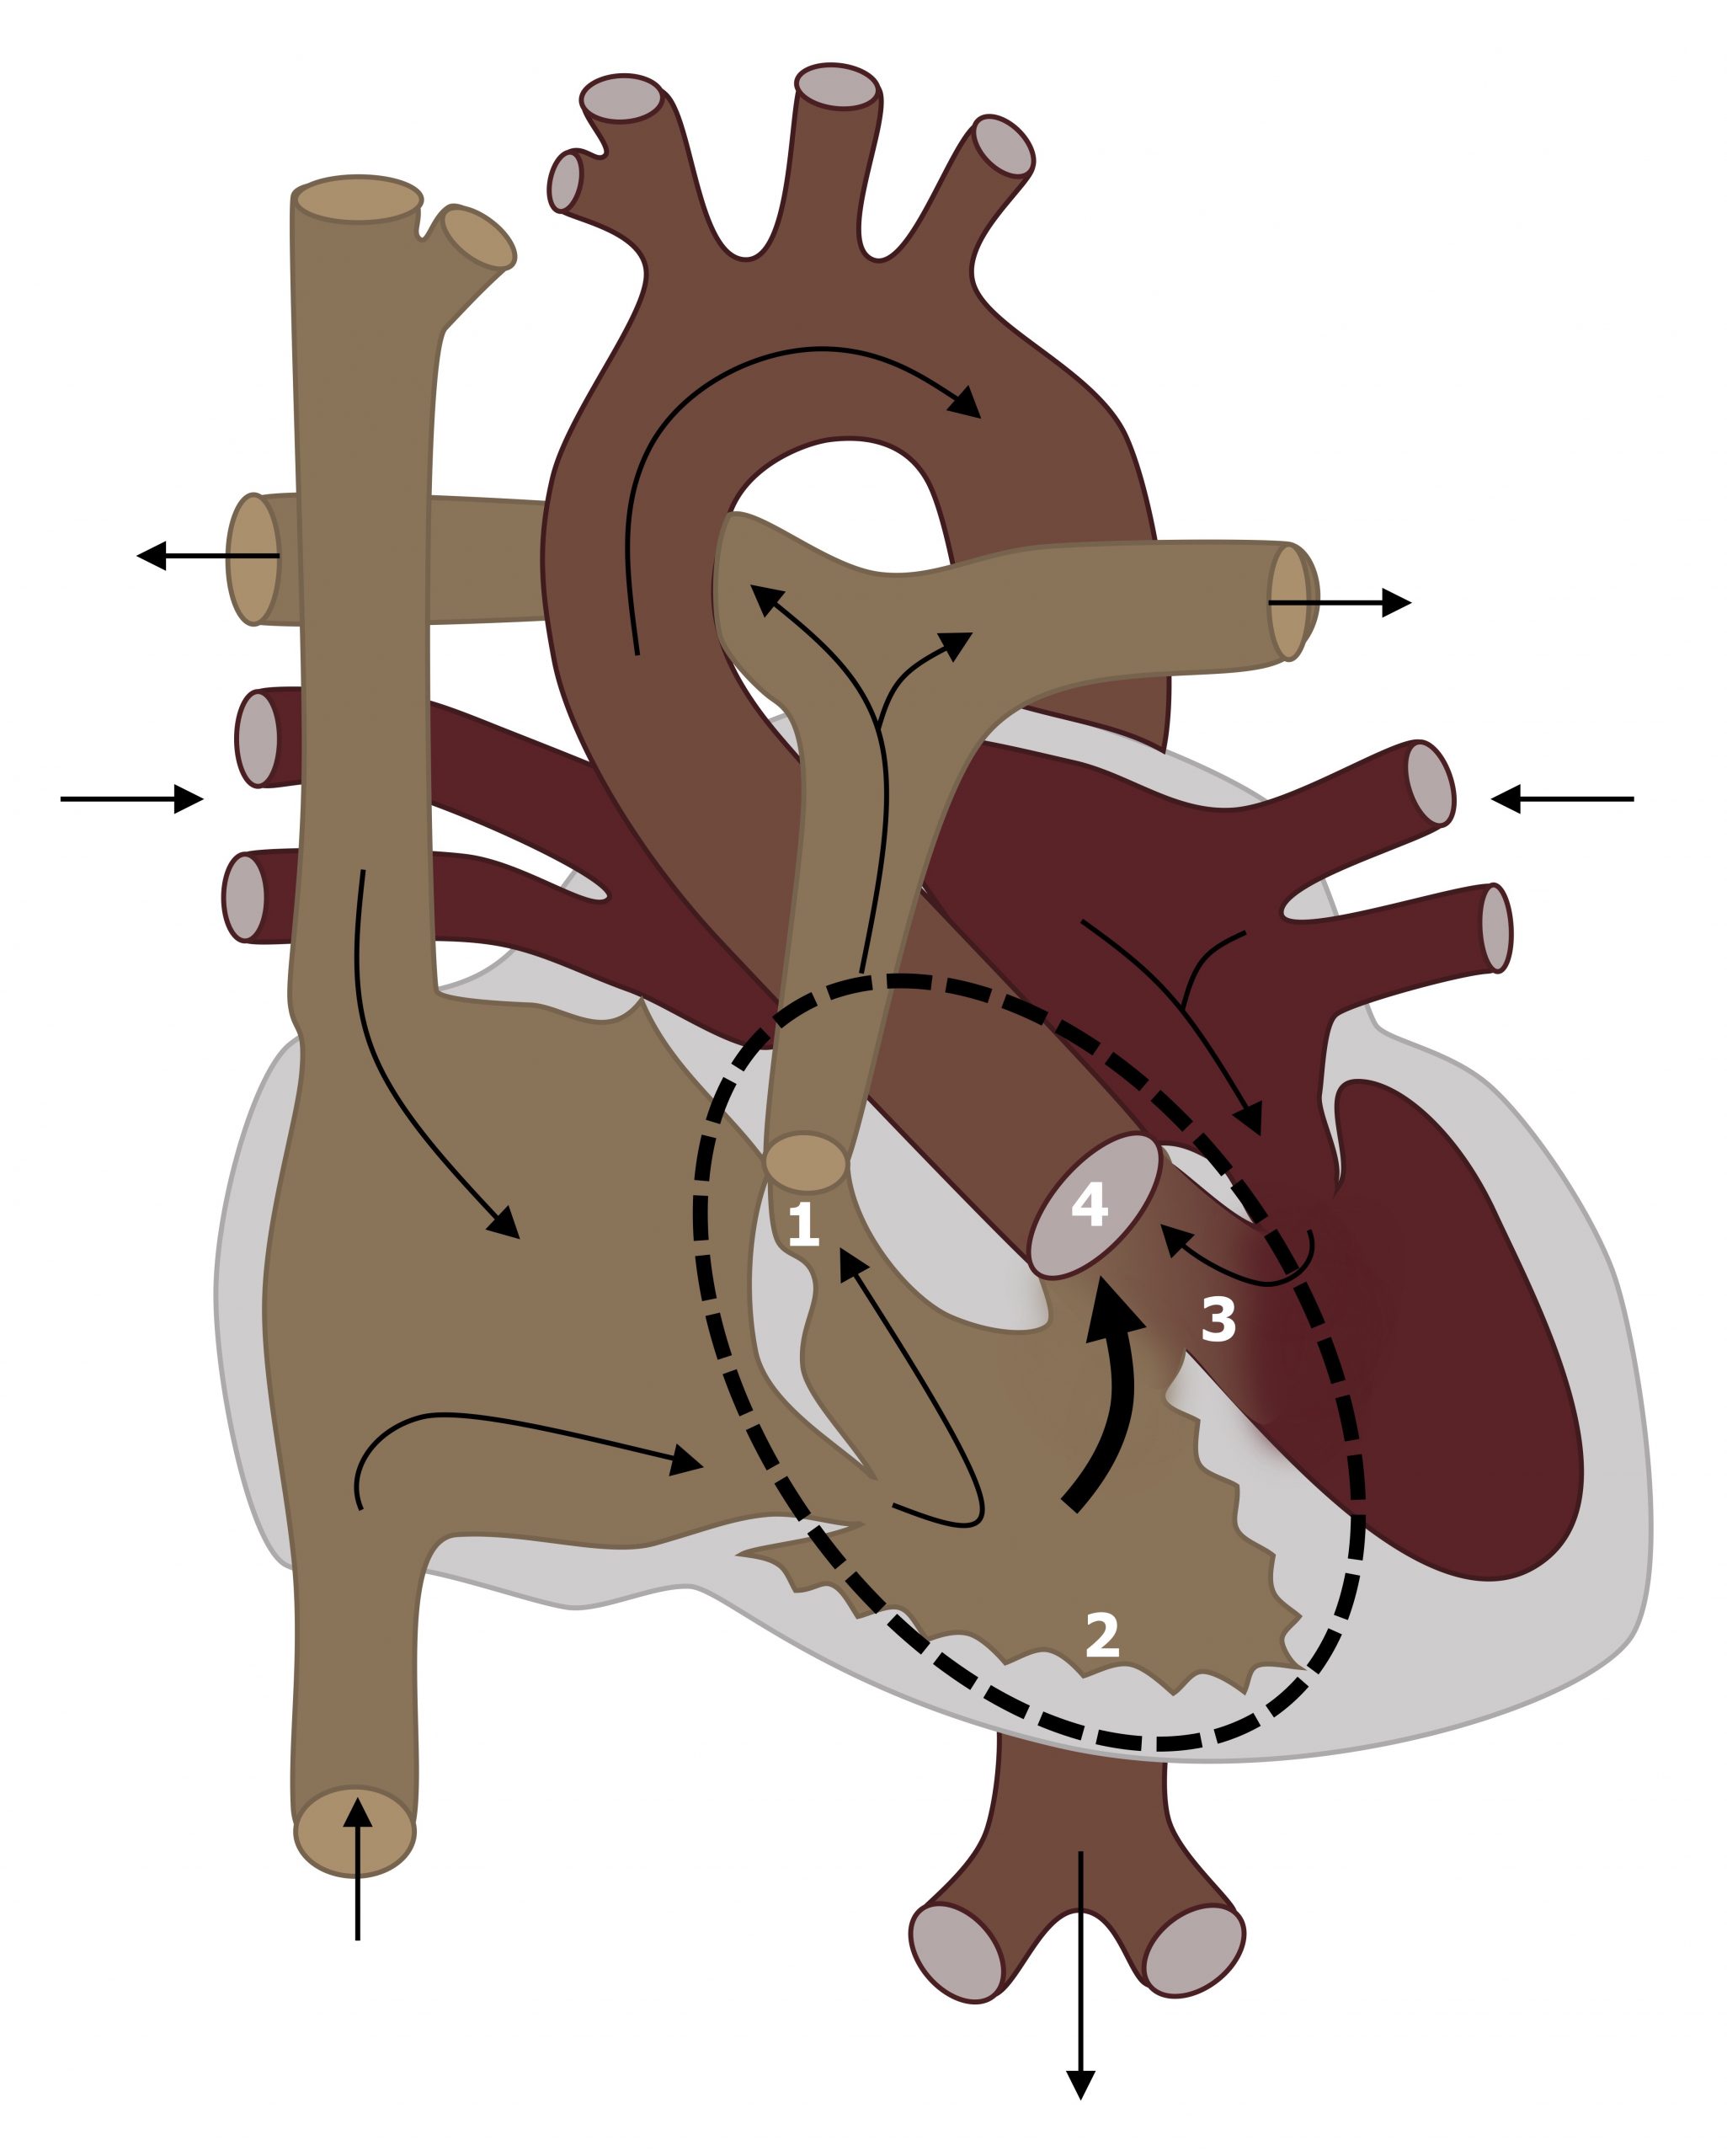 A diagram of the circulatory pathway through the heart has four features of tetralogy of fallot that are labelled with numbers 1-4. Number 1 is placed over the entrance of the pulmonic valve and highlights its narrowed or stenosed appearance. Number 2 is placed on the right atrium wall that is thickened denoting right ventricular hypertrophy. Number 3 is placed over a gap the ventricular septum and represents a ventricular septal defect. Number 4 is over the entrance of the aorta which is positioned near the septal defect and therefore capable of receiving blood from both ventricles